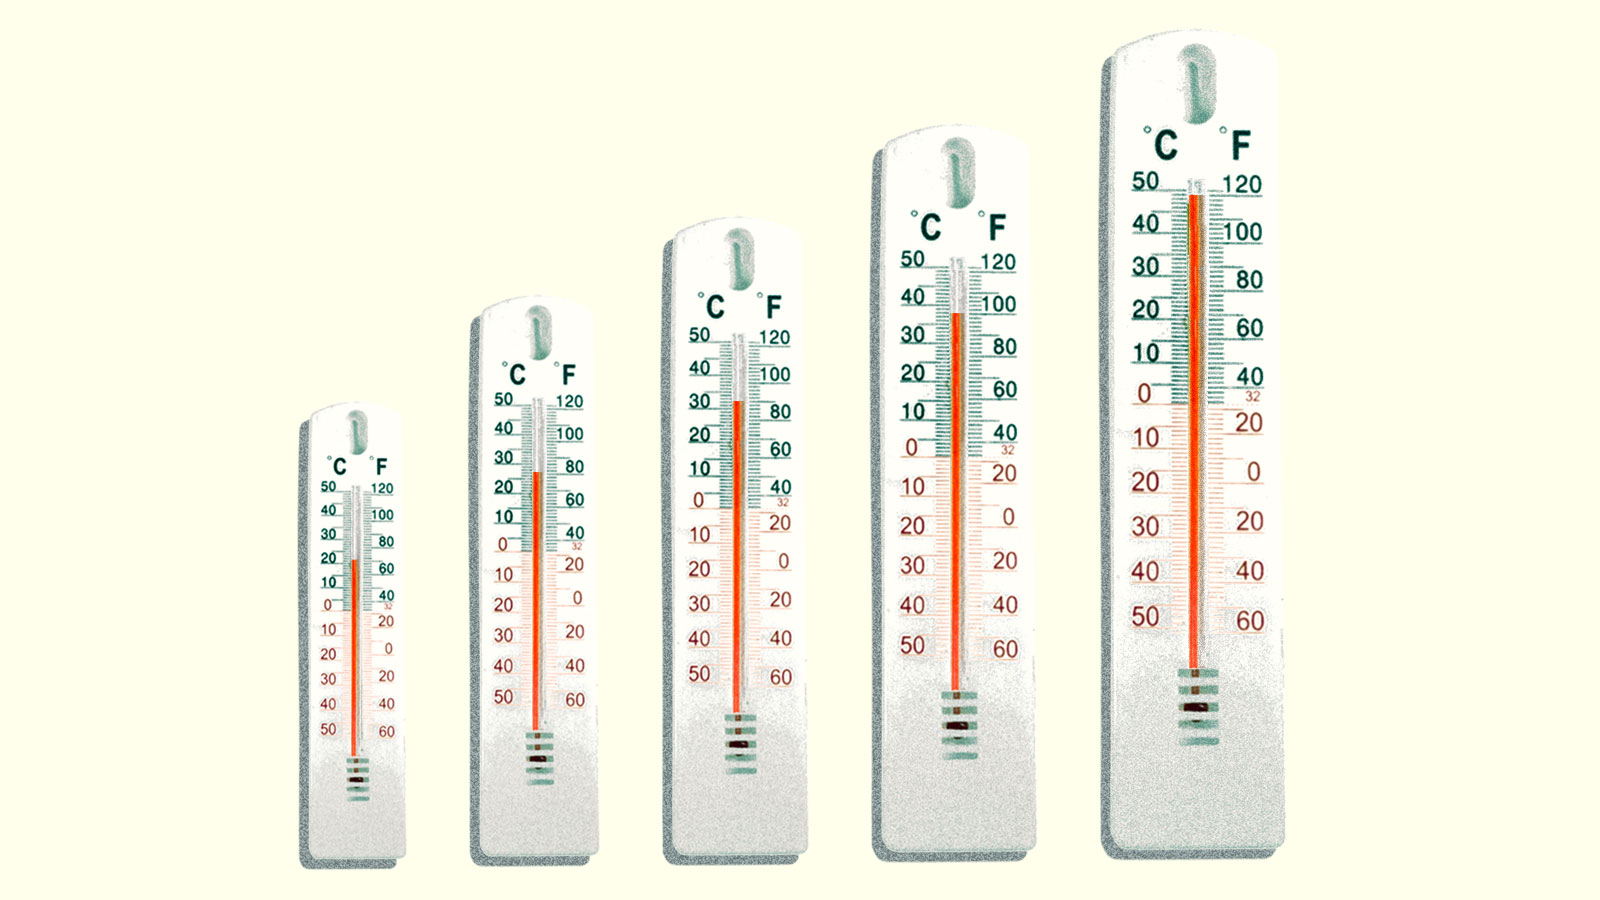 Five outdoor thermometers arranged left to right from smallest size to largest, with the temperature rising from 70 degrees in the first to 120 in the last